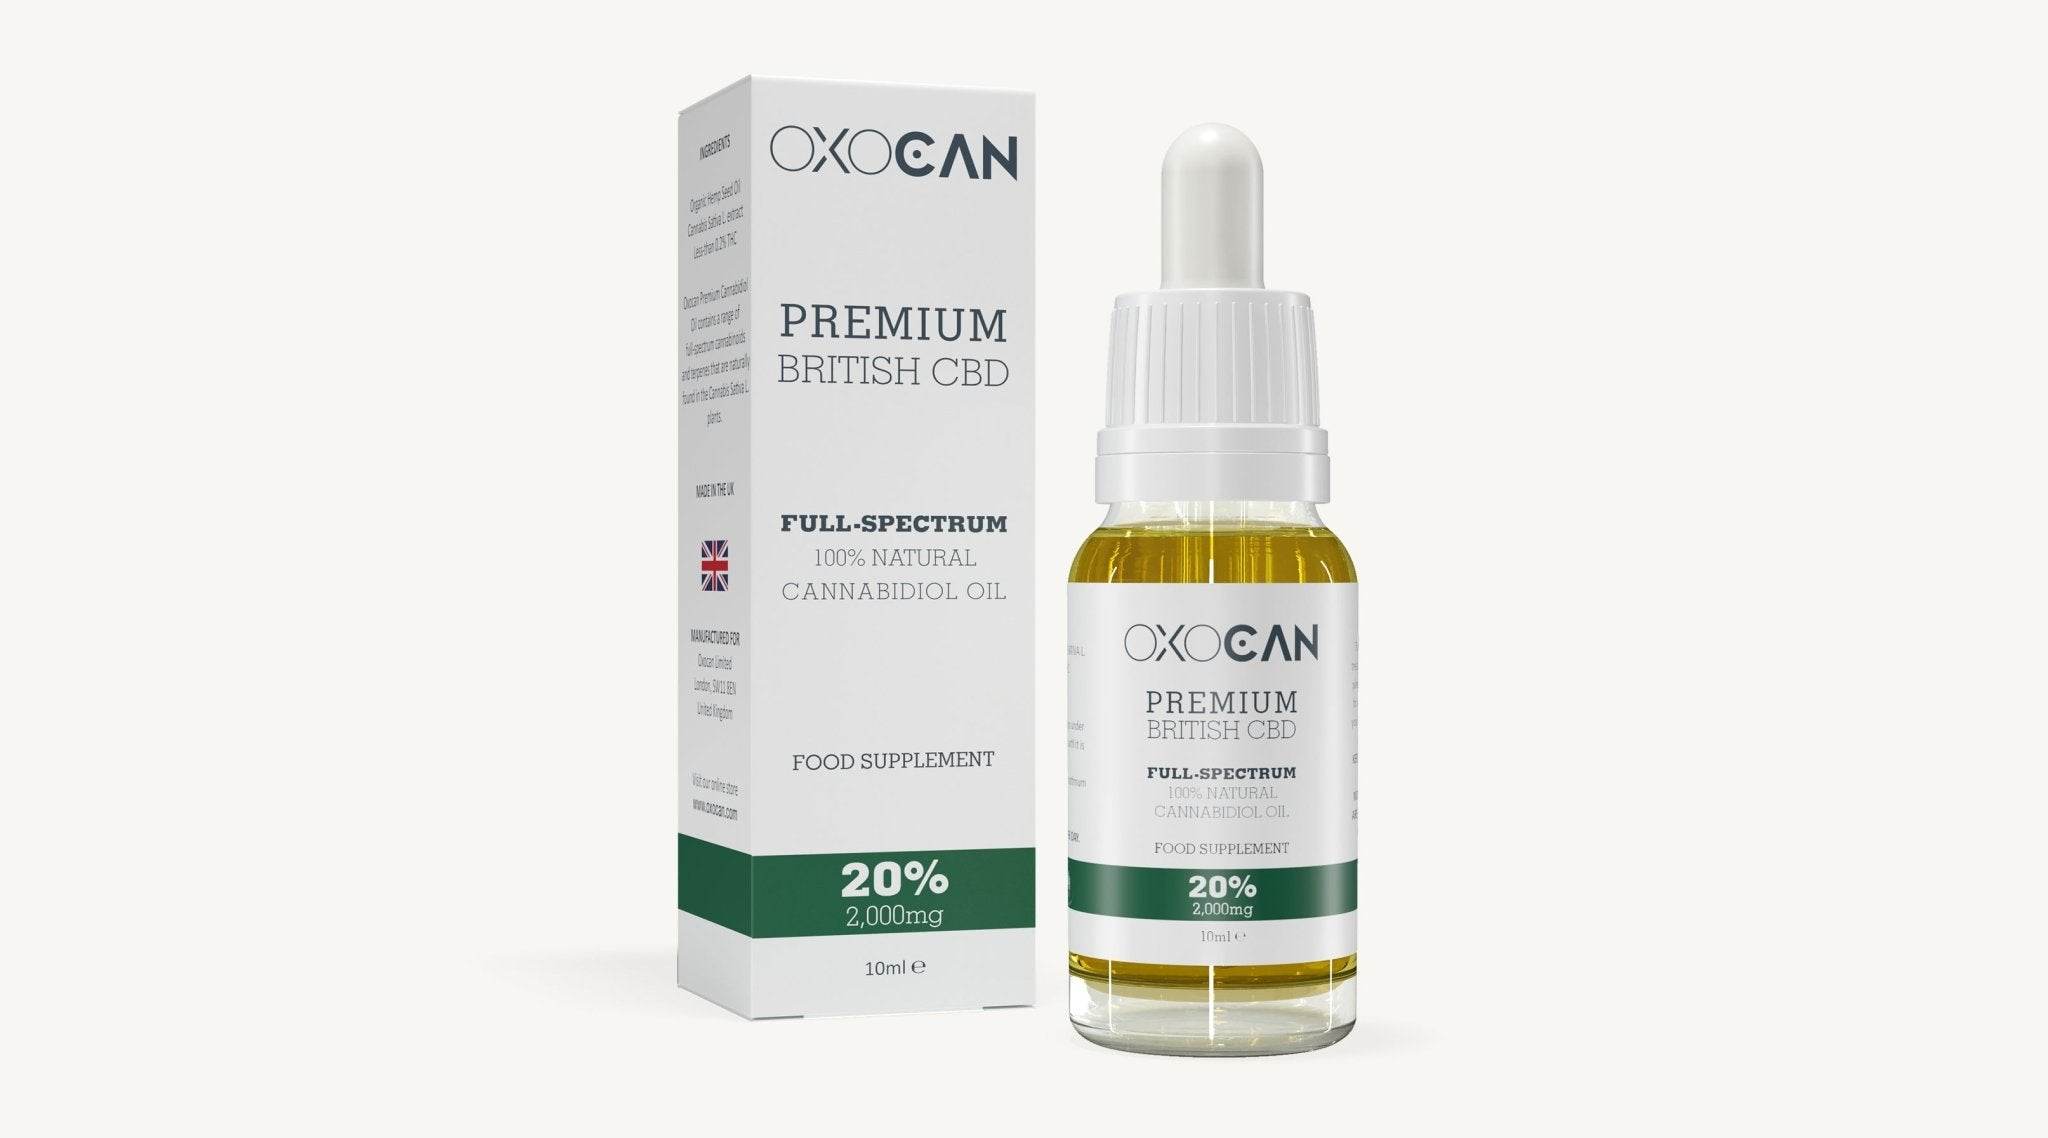 Oxocan CBD as part of your daily routine Oxocan 